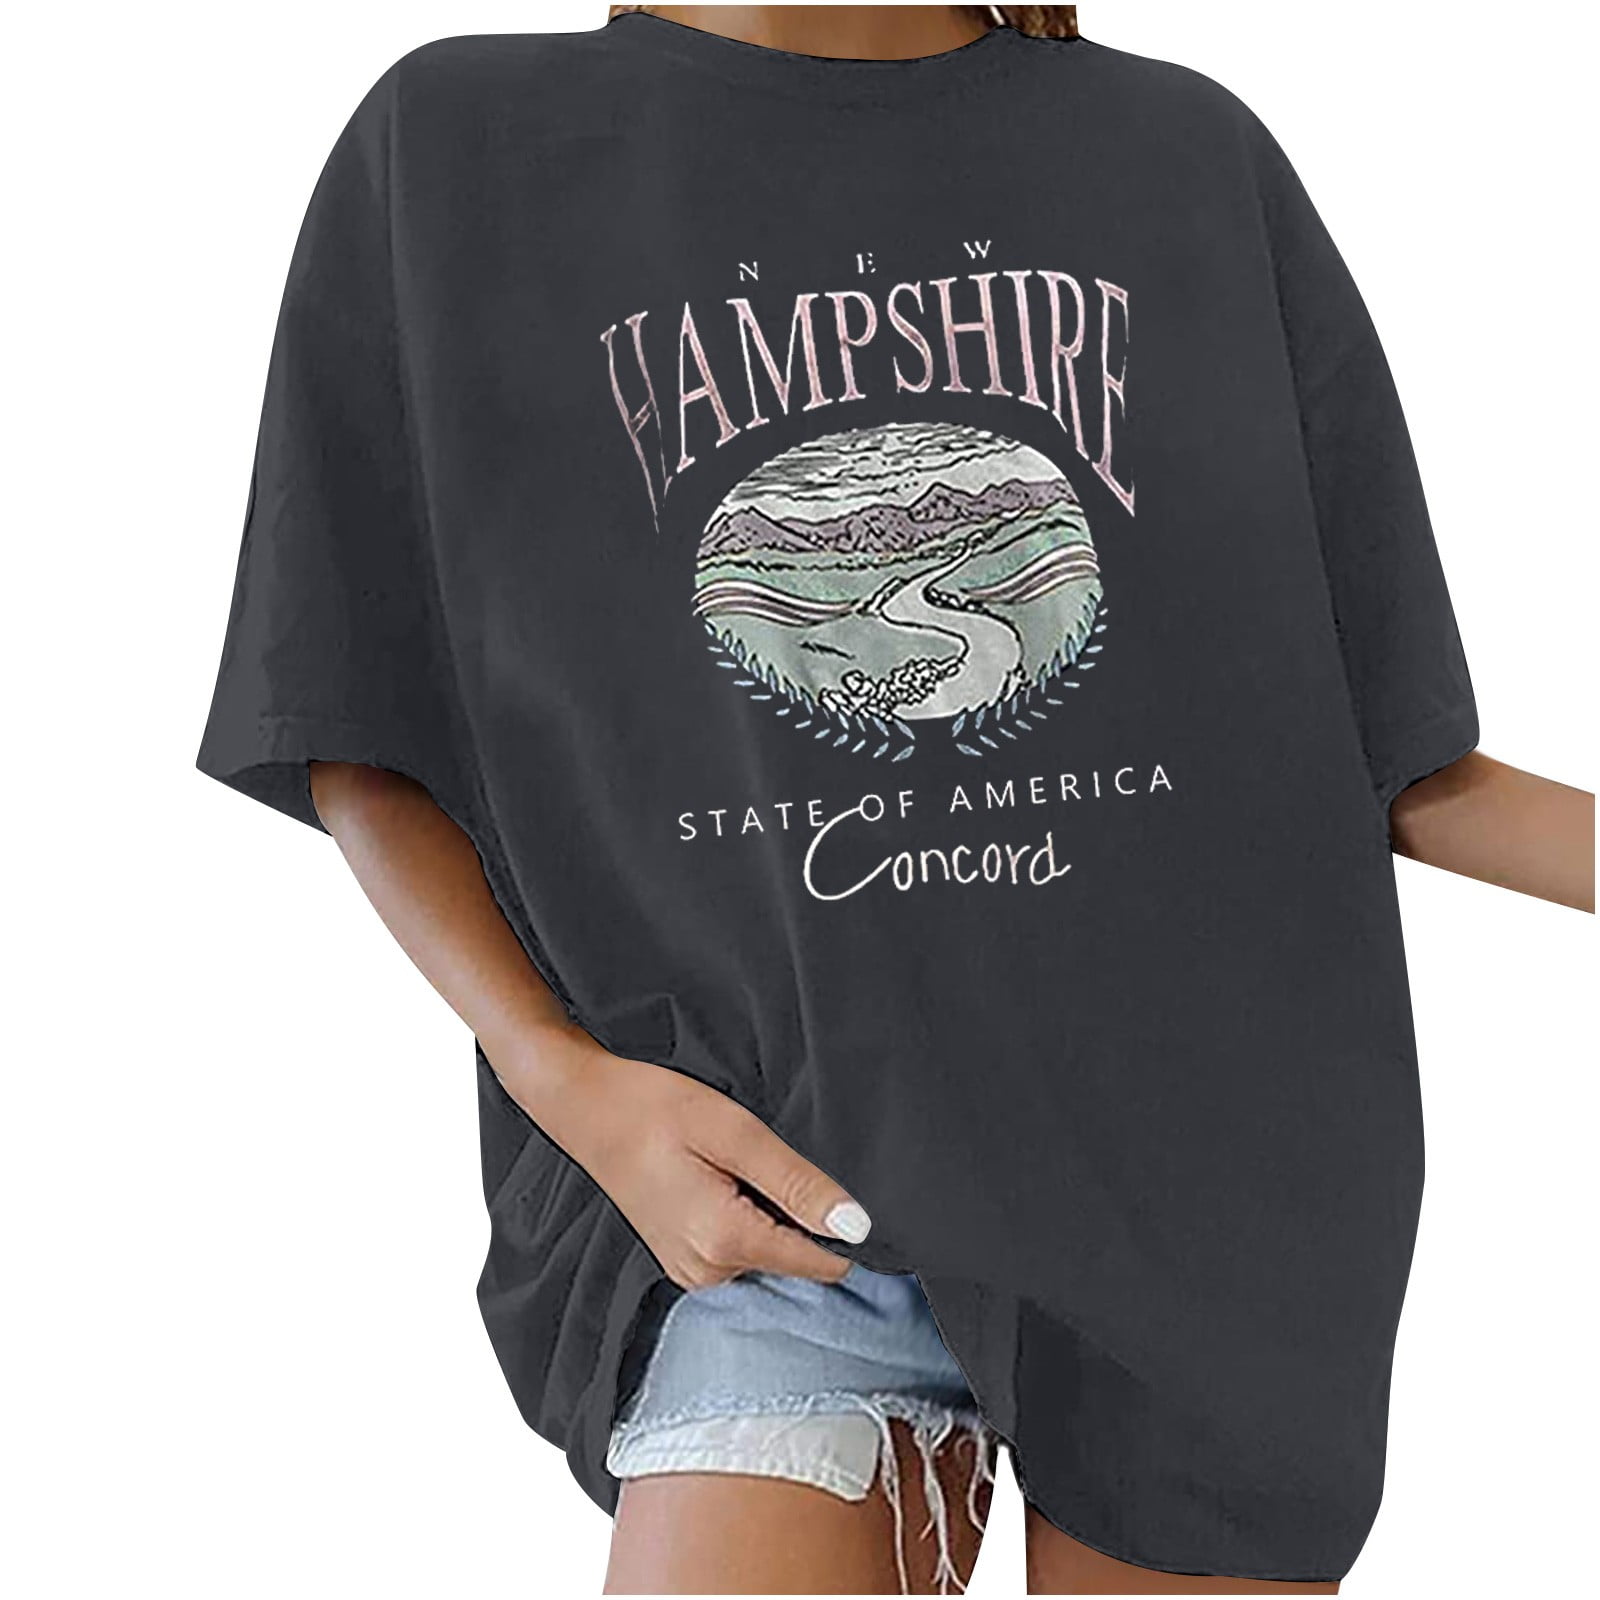 New Hampshire State of America Concord Tops Blouse Graphic Tees Womens Tops Vintage Loose T-Shirts 